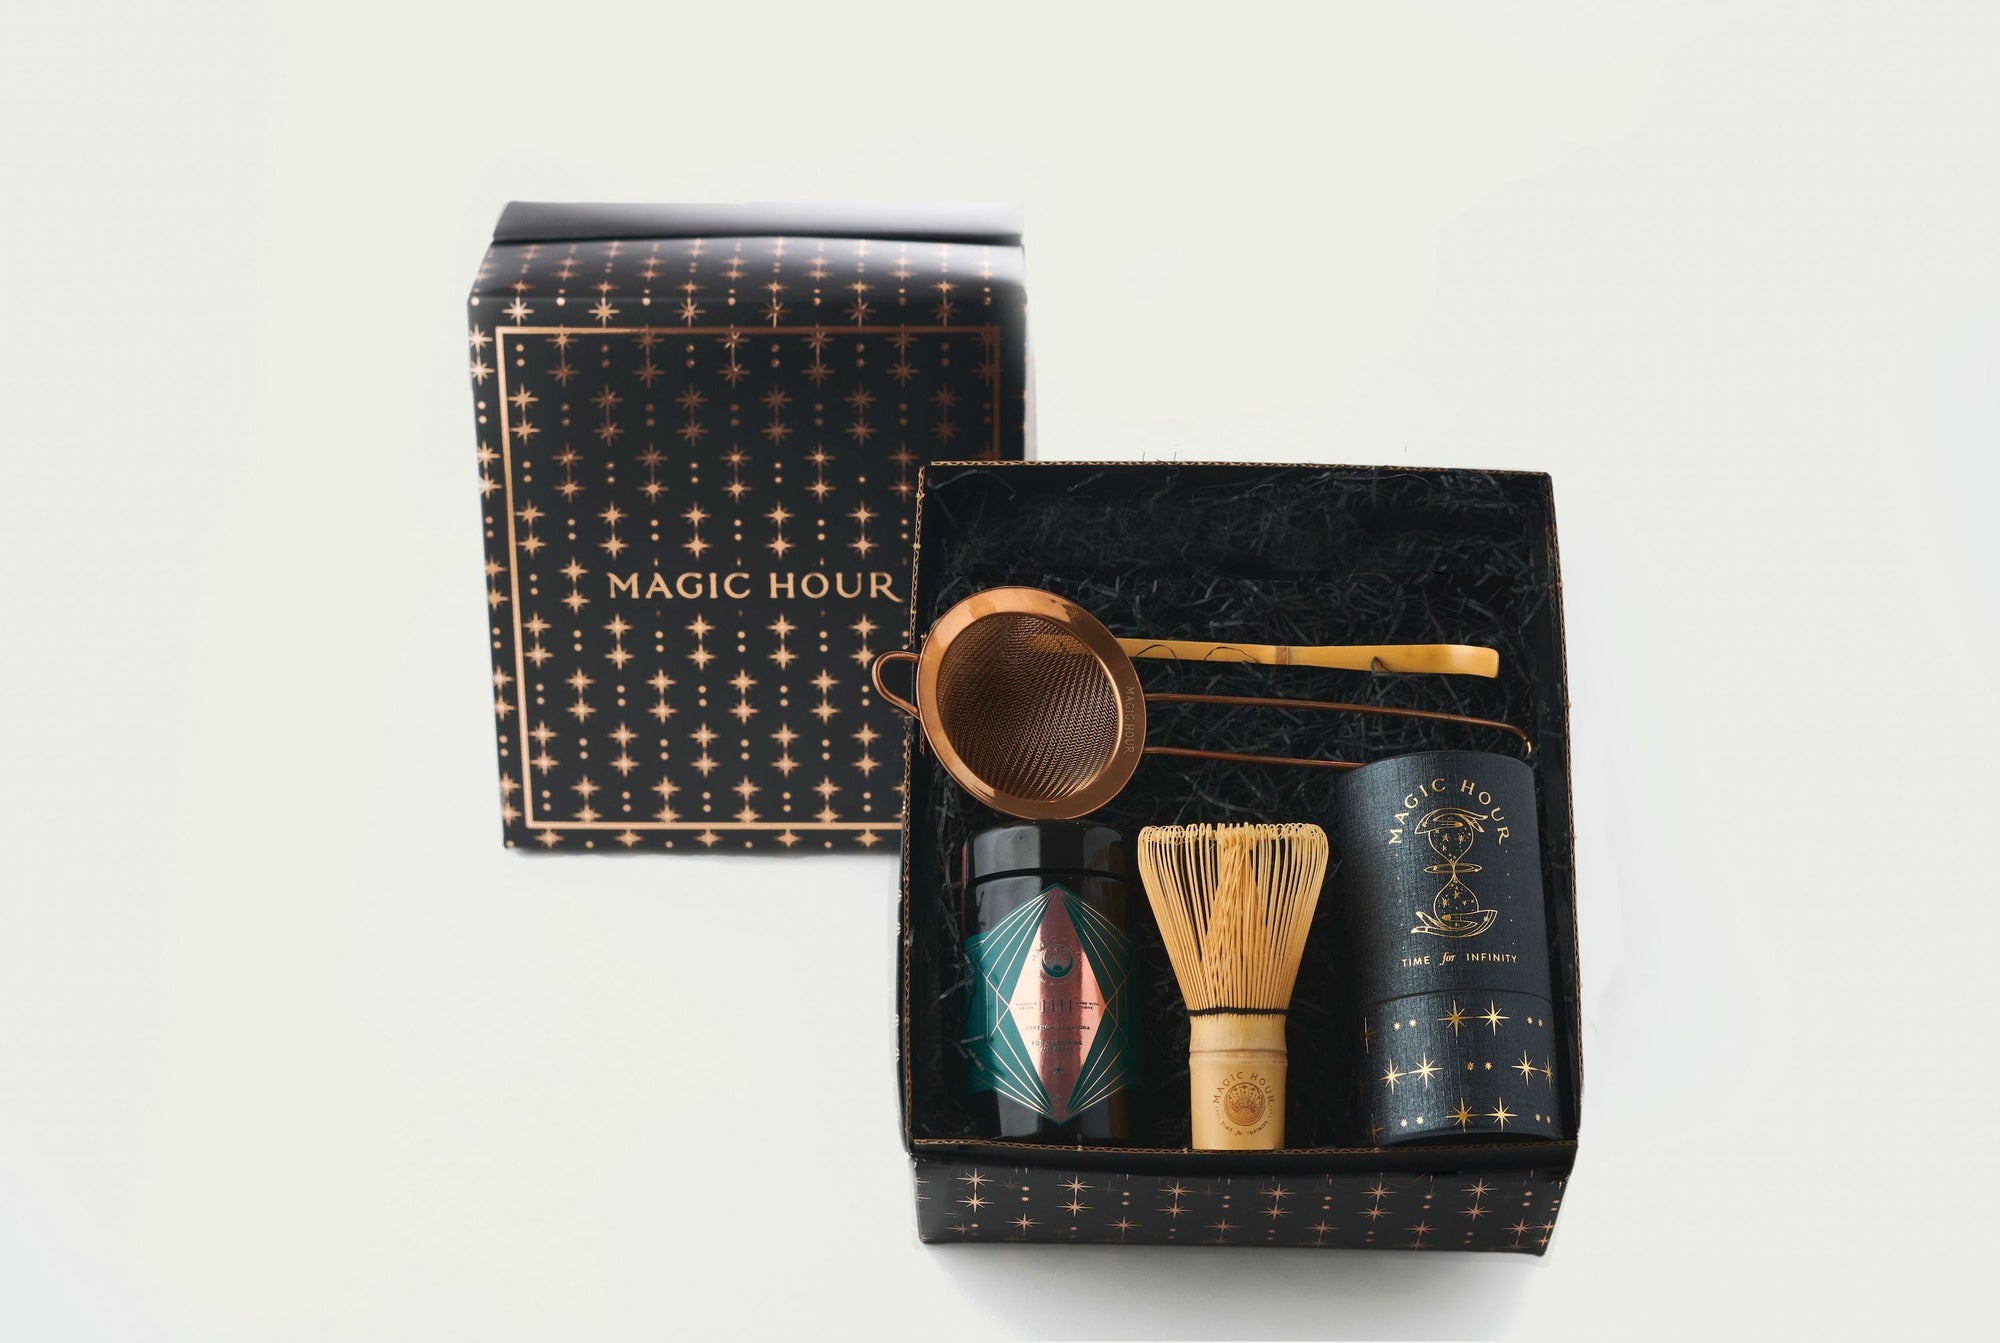 A gift box titled "Matcha 1111 : Gift Set" by Magic Hour is open to reveal its contents: a metallic tea strainer, a black tin with a colorful label, organic loose leaf tea, a straw whisk, and a black cylindrical container. The box and lid are black with a pattern of gold stars.